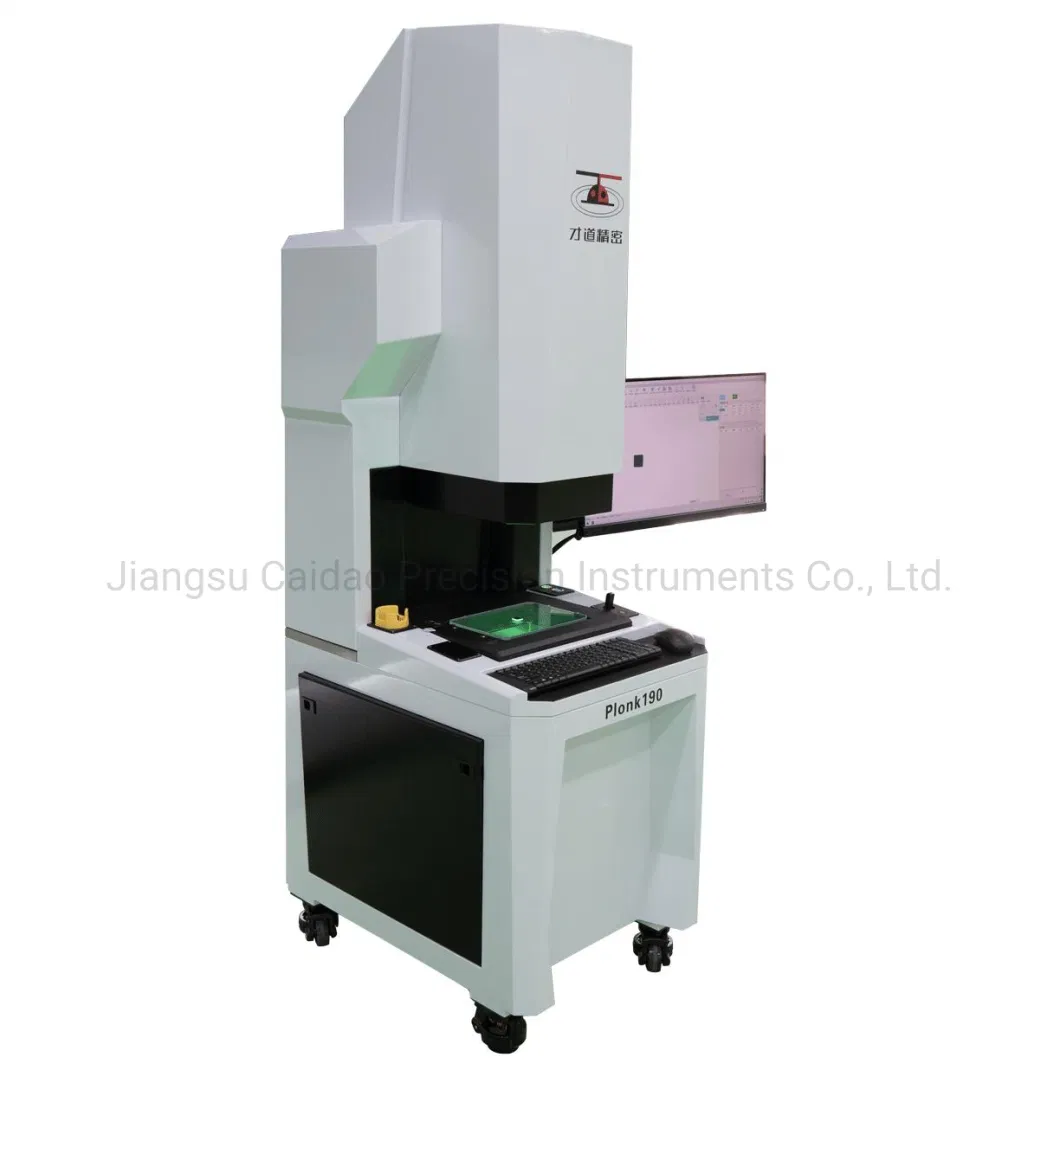 Optical Coordinate Measuring Machine for RFID Electronic Tags Inspection Plonk 190